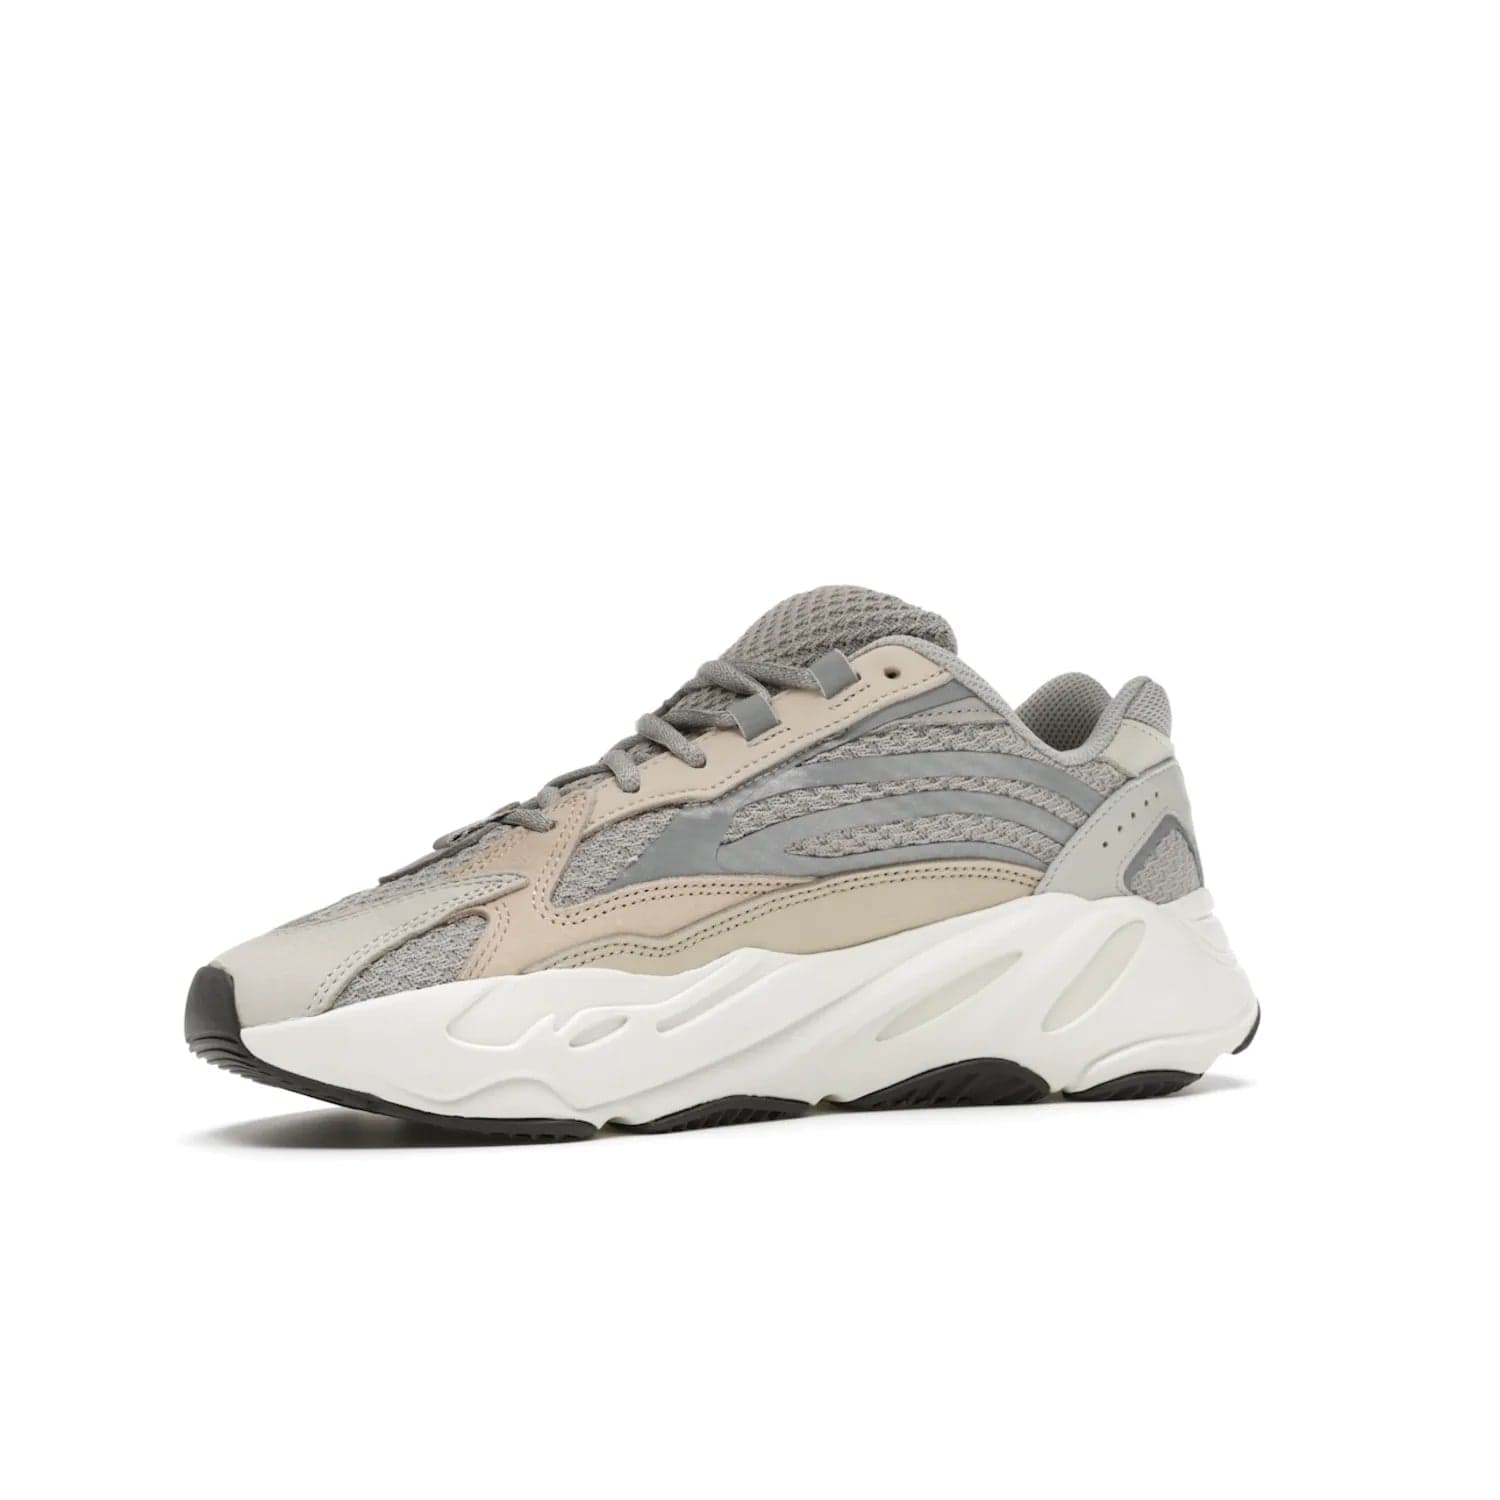 adidas Yeezy Boost 700 V2 Cream - Image 16 - Only at www.BallersClubKickz.com - Add style and luxury to your wardrobe with the adidas Yeezy 700 V2 Cream. Featuring a unique reflective upper, leather overlays, mesh underlays and the signature BOOST midsole, this silhouette is perfect for any stylish wardrobe.